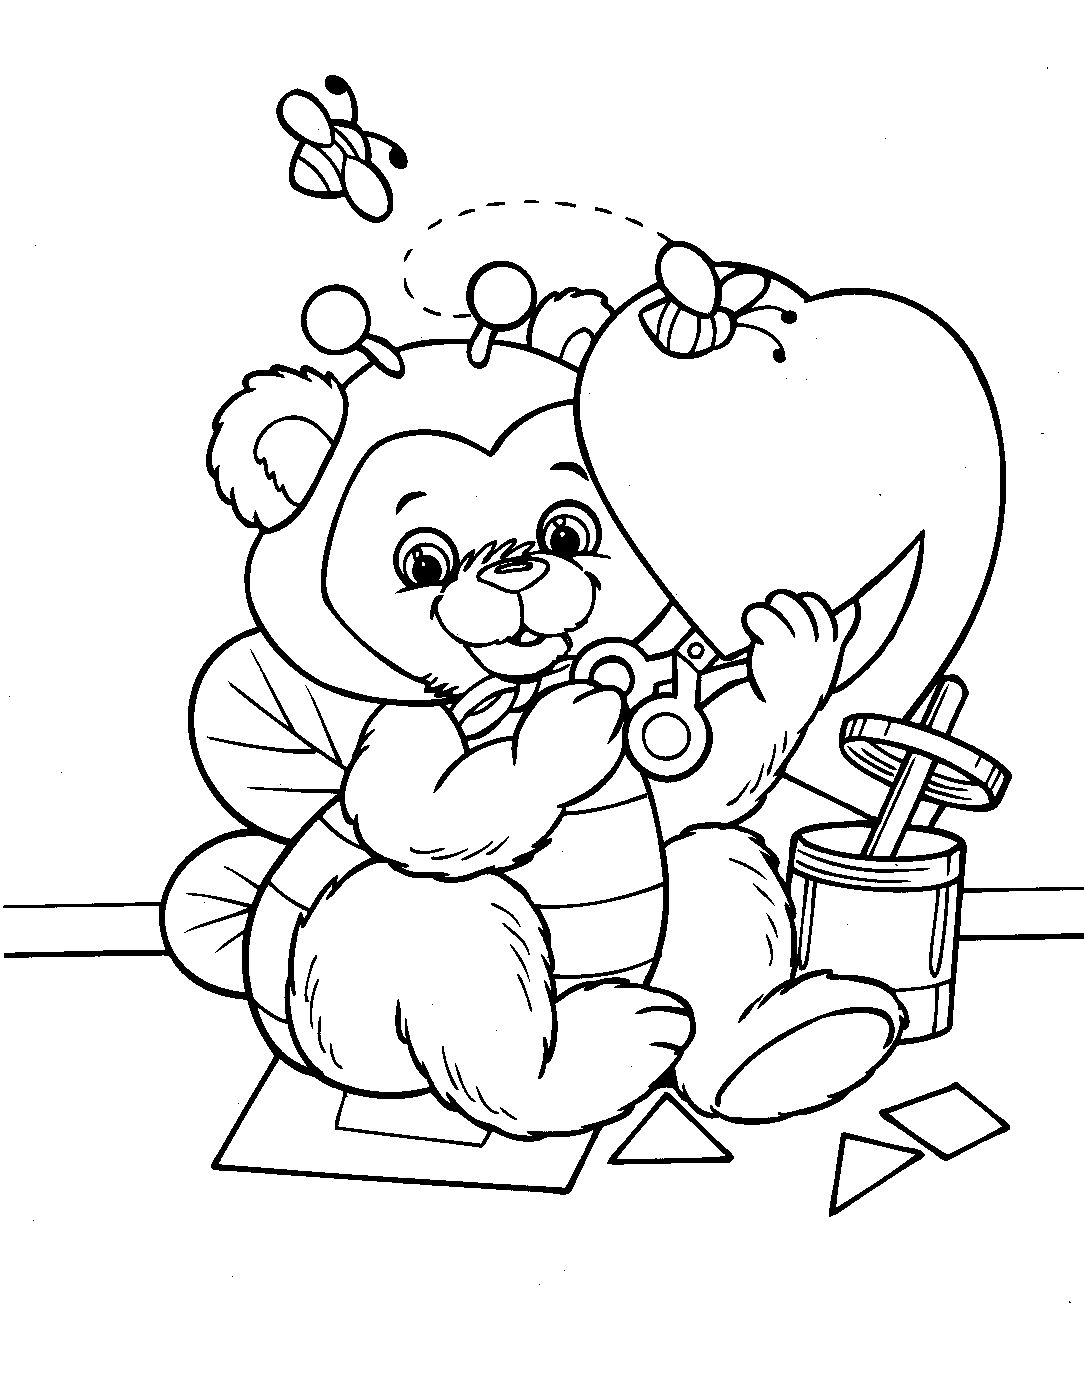 valentines pictures to color 29 valentines day coloring pages to print for kids sheknows color valentines to pictures 